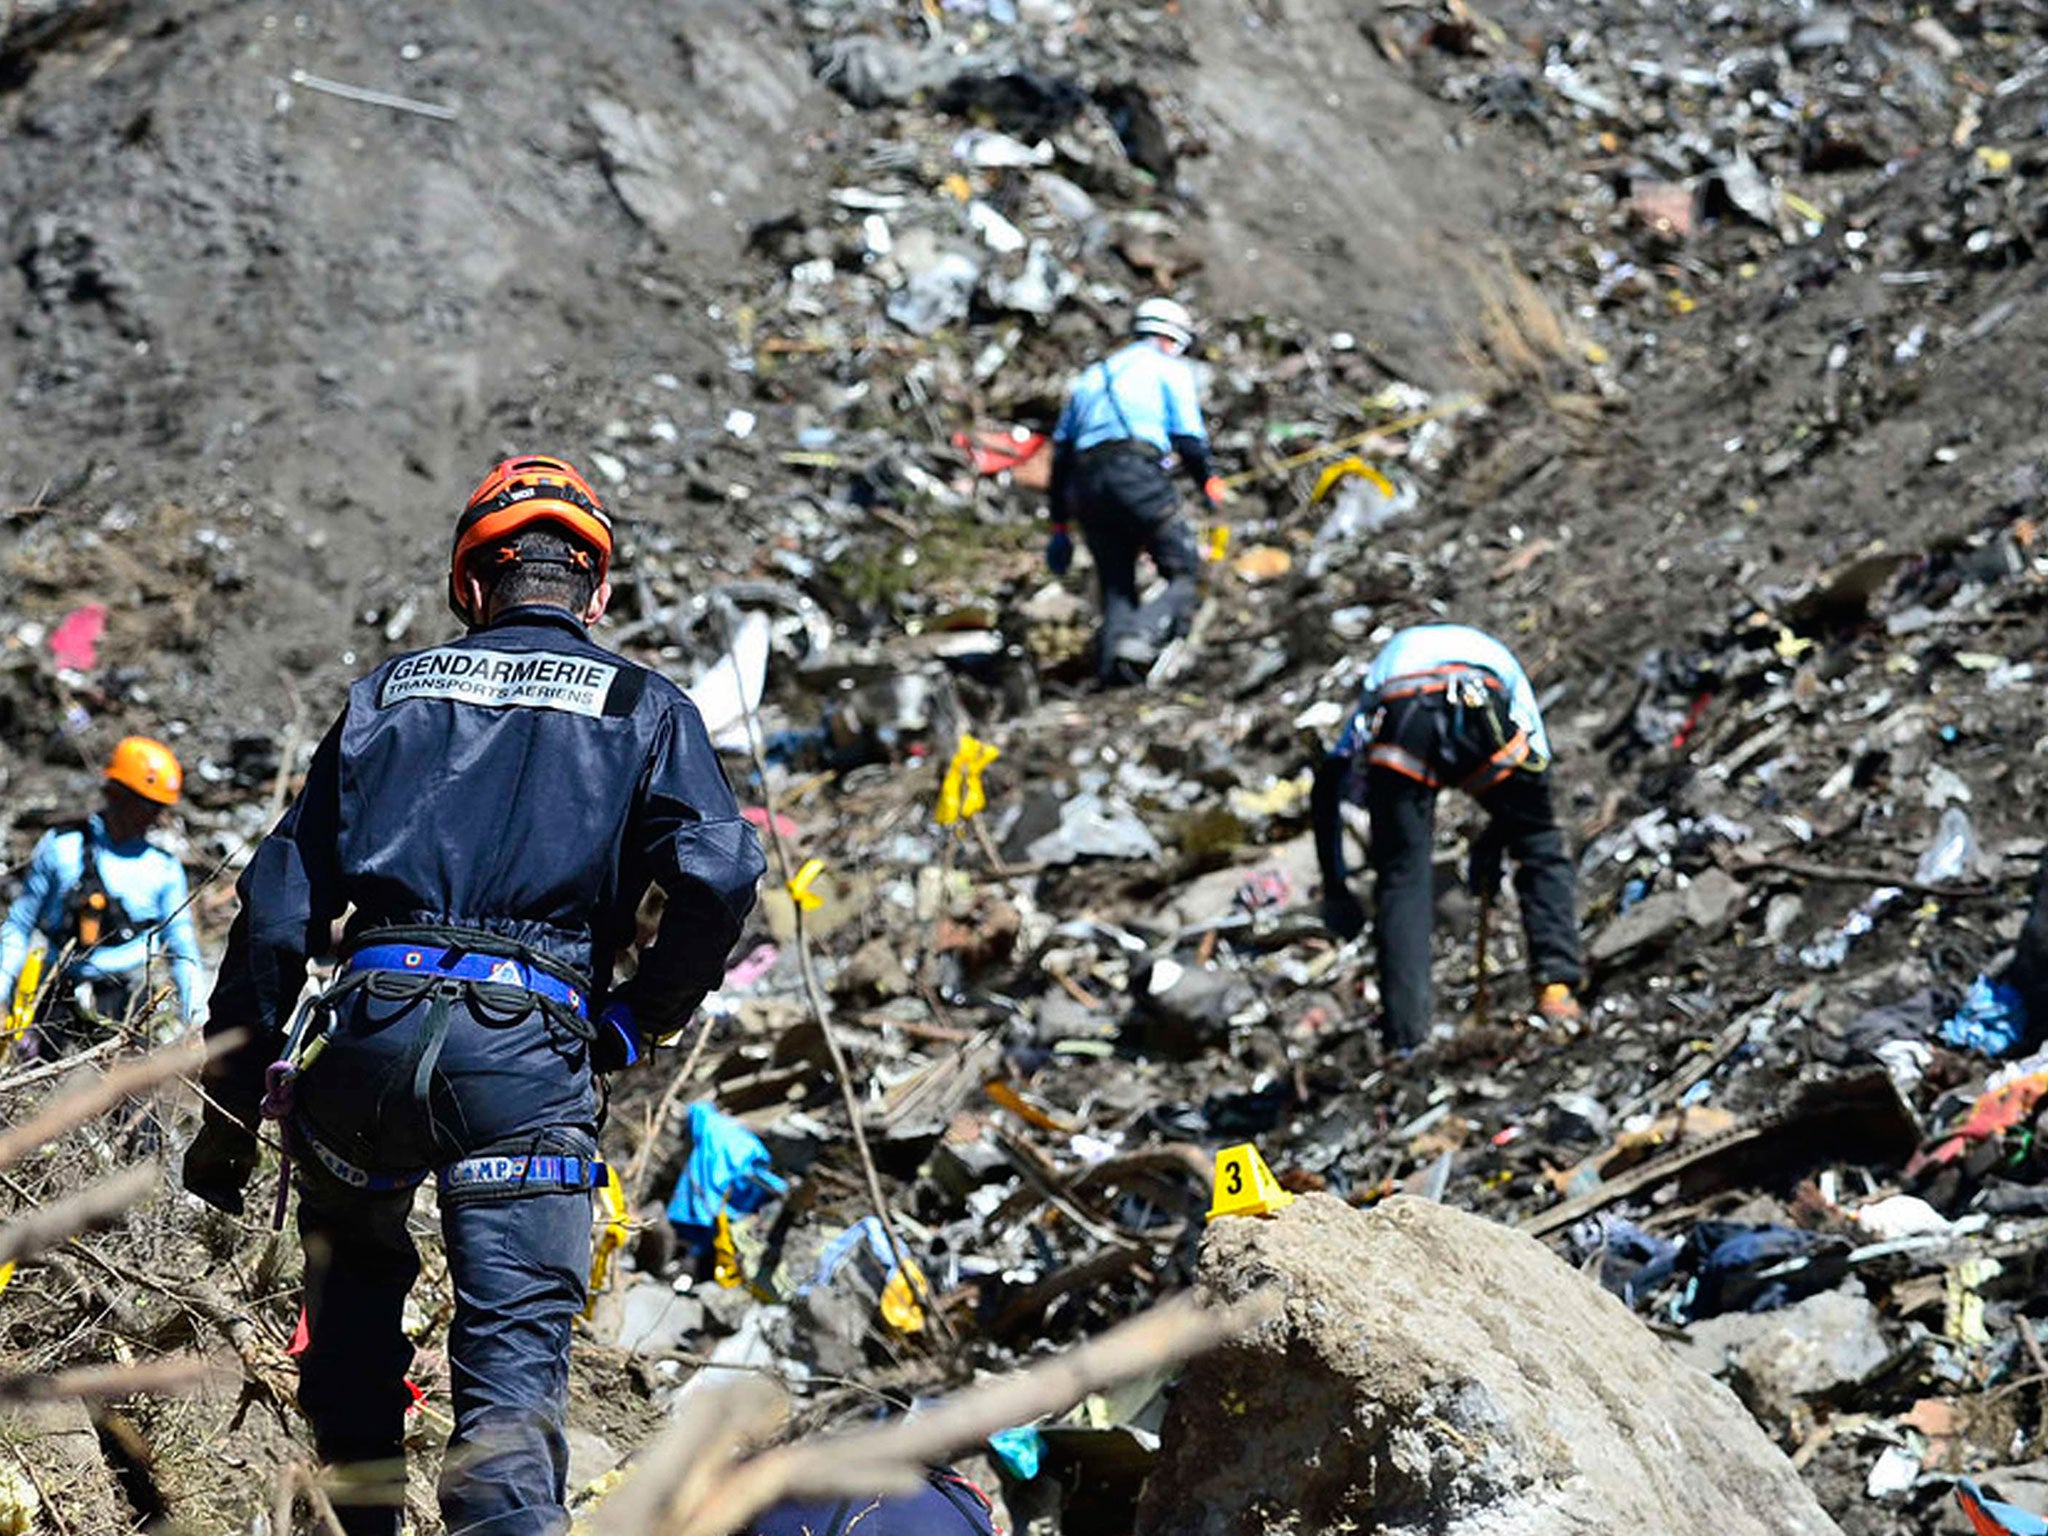 French gendarmes and investigators make their way through debris from wreckage on the mountainside at the crash site of an Airbus A320, near Seyne-les-Alpes